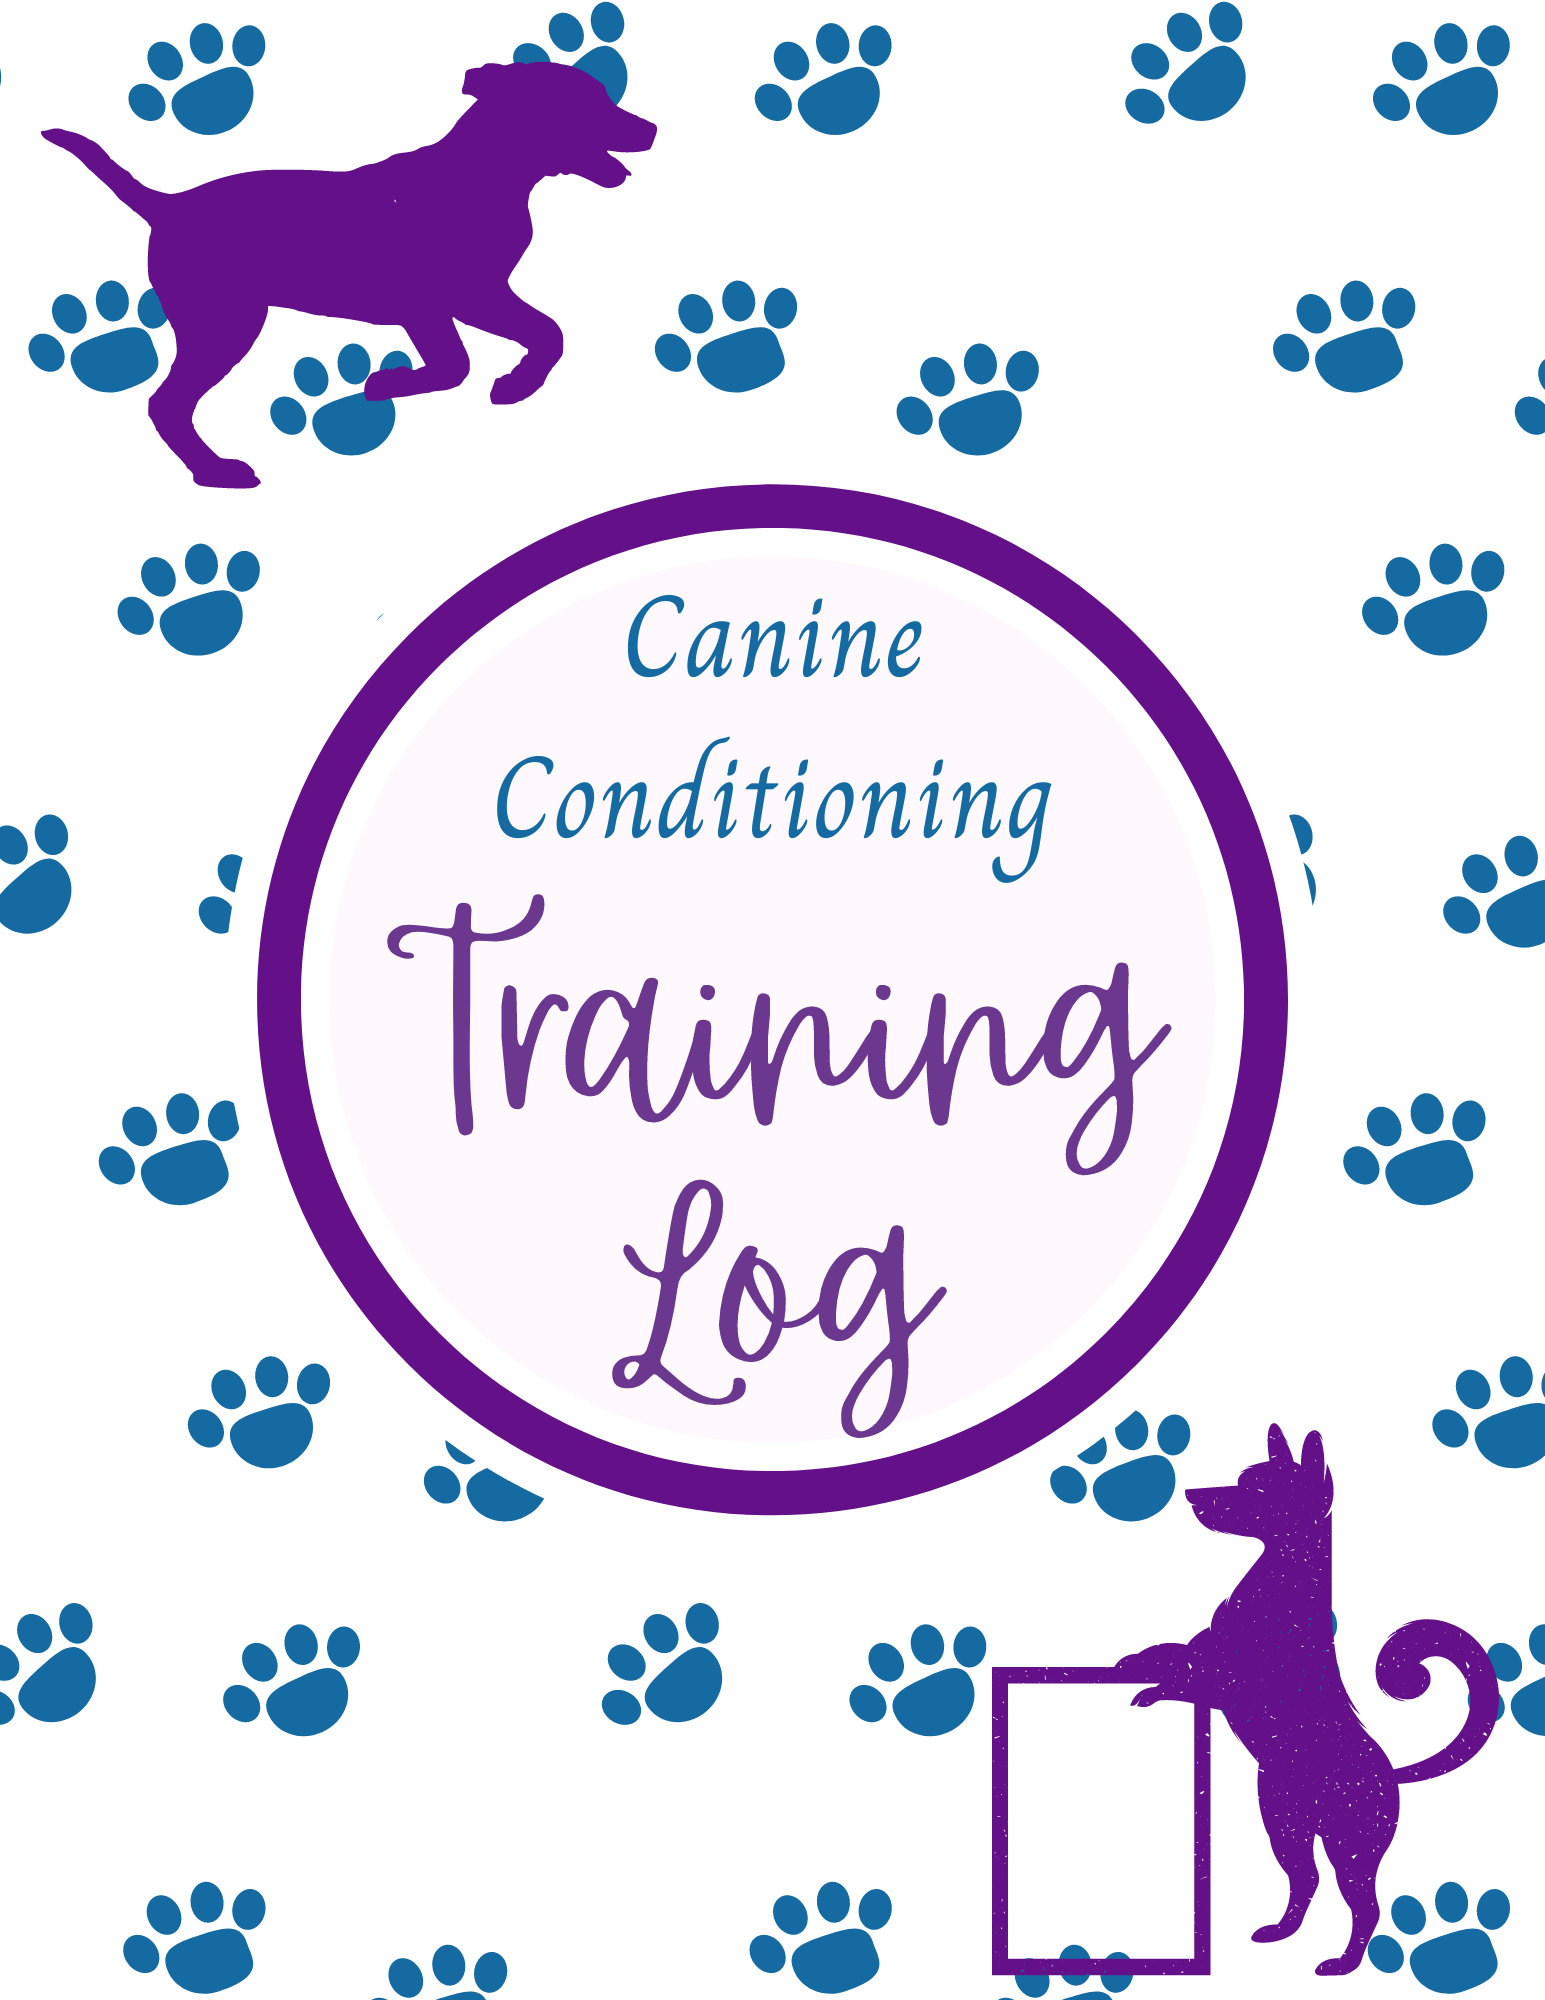 Canine Conditioning Training Log cover